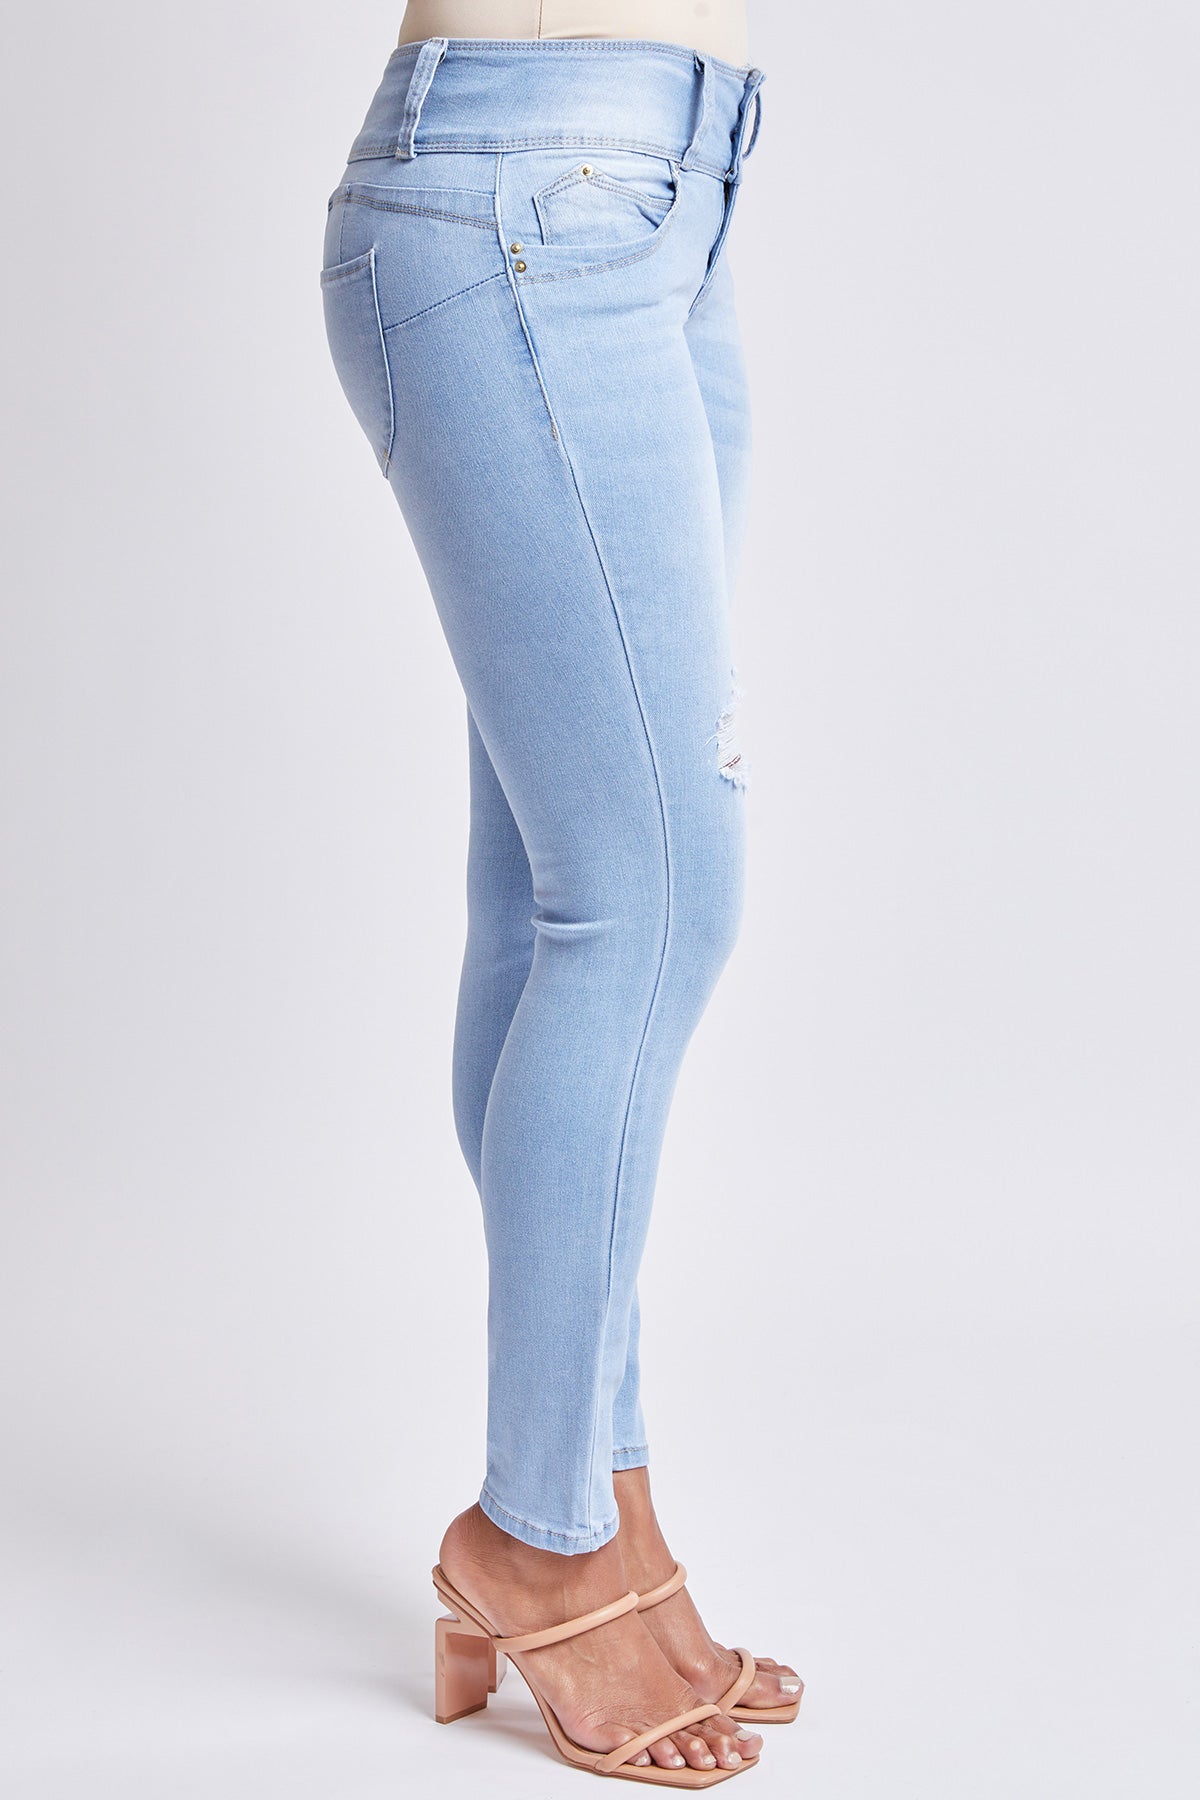 Missy Wannabettabutt 3-Button Mid-Rise Lycra Skinny Jean Made With Recycled Fibers Pack Of 12